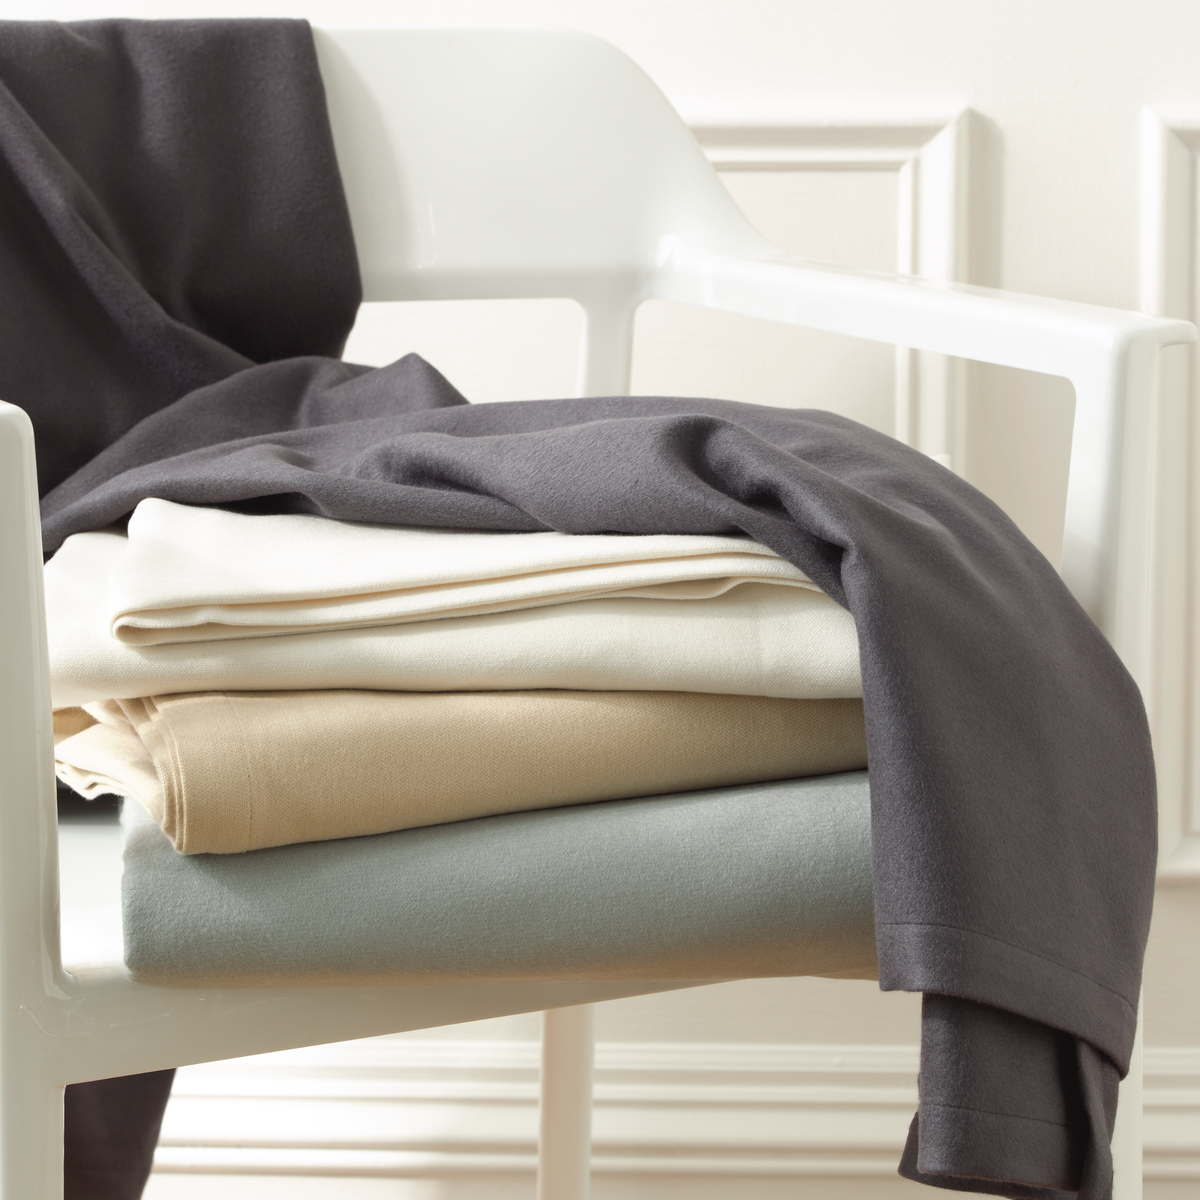 All Colors of Matouk Dream Modal Throws